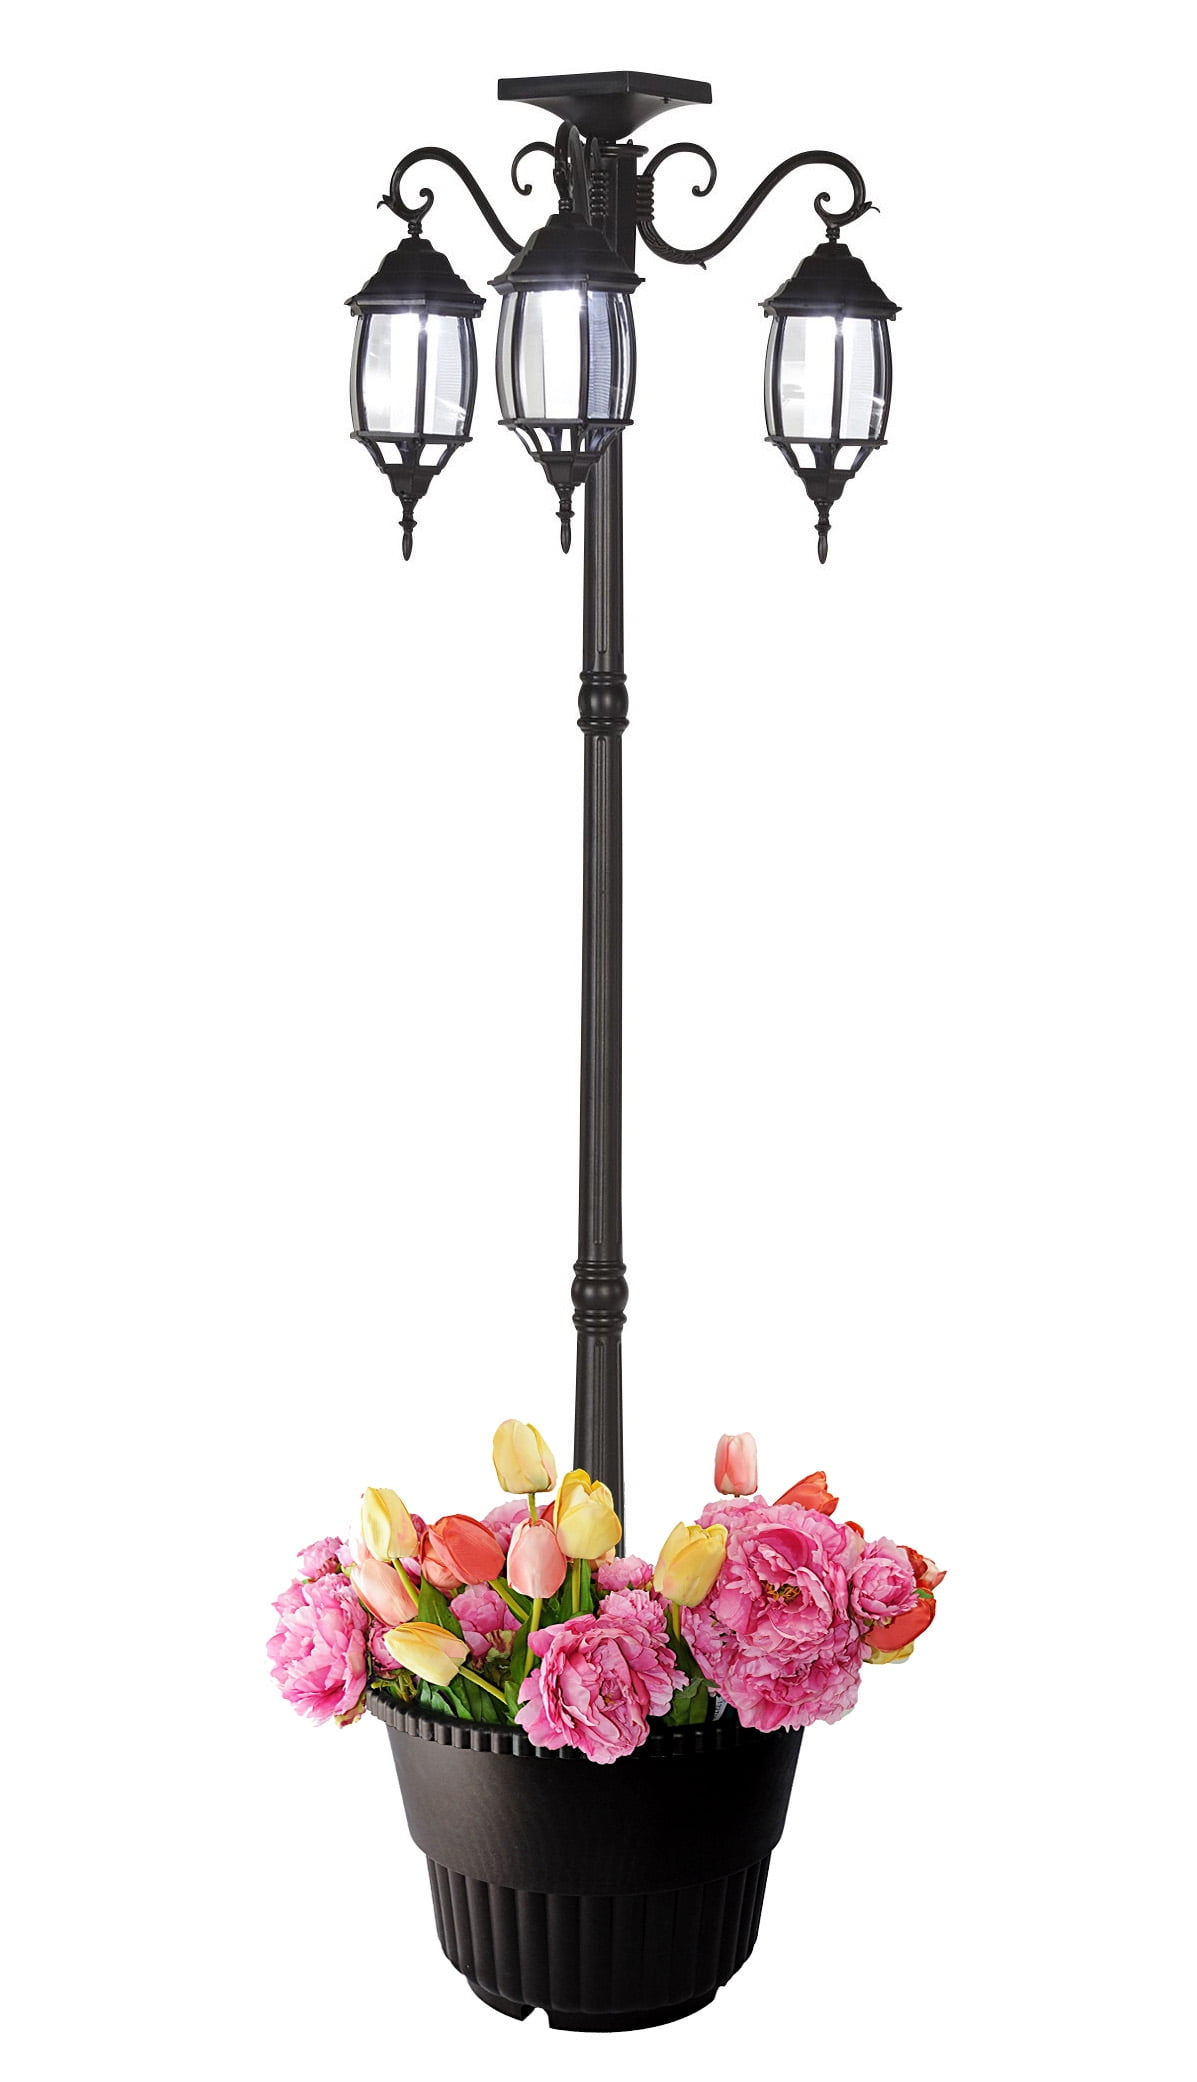 Tall Solar Lamp Post And Planter, Solar Lamp Post With Planter Base